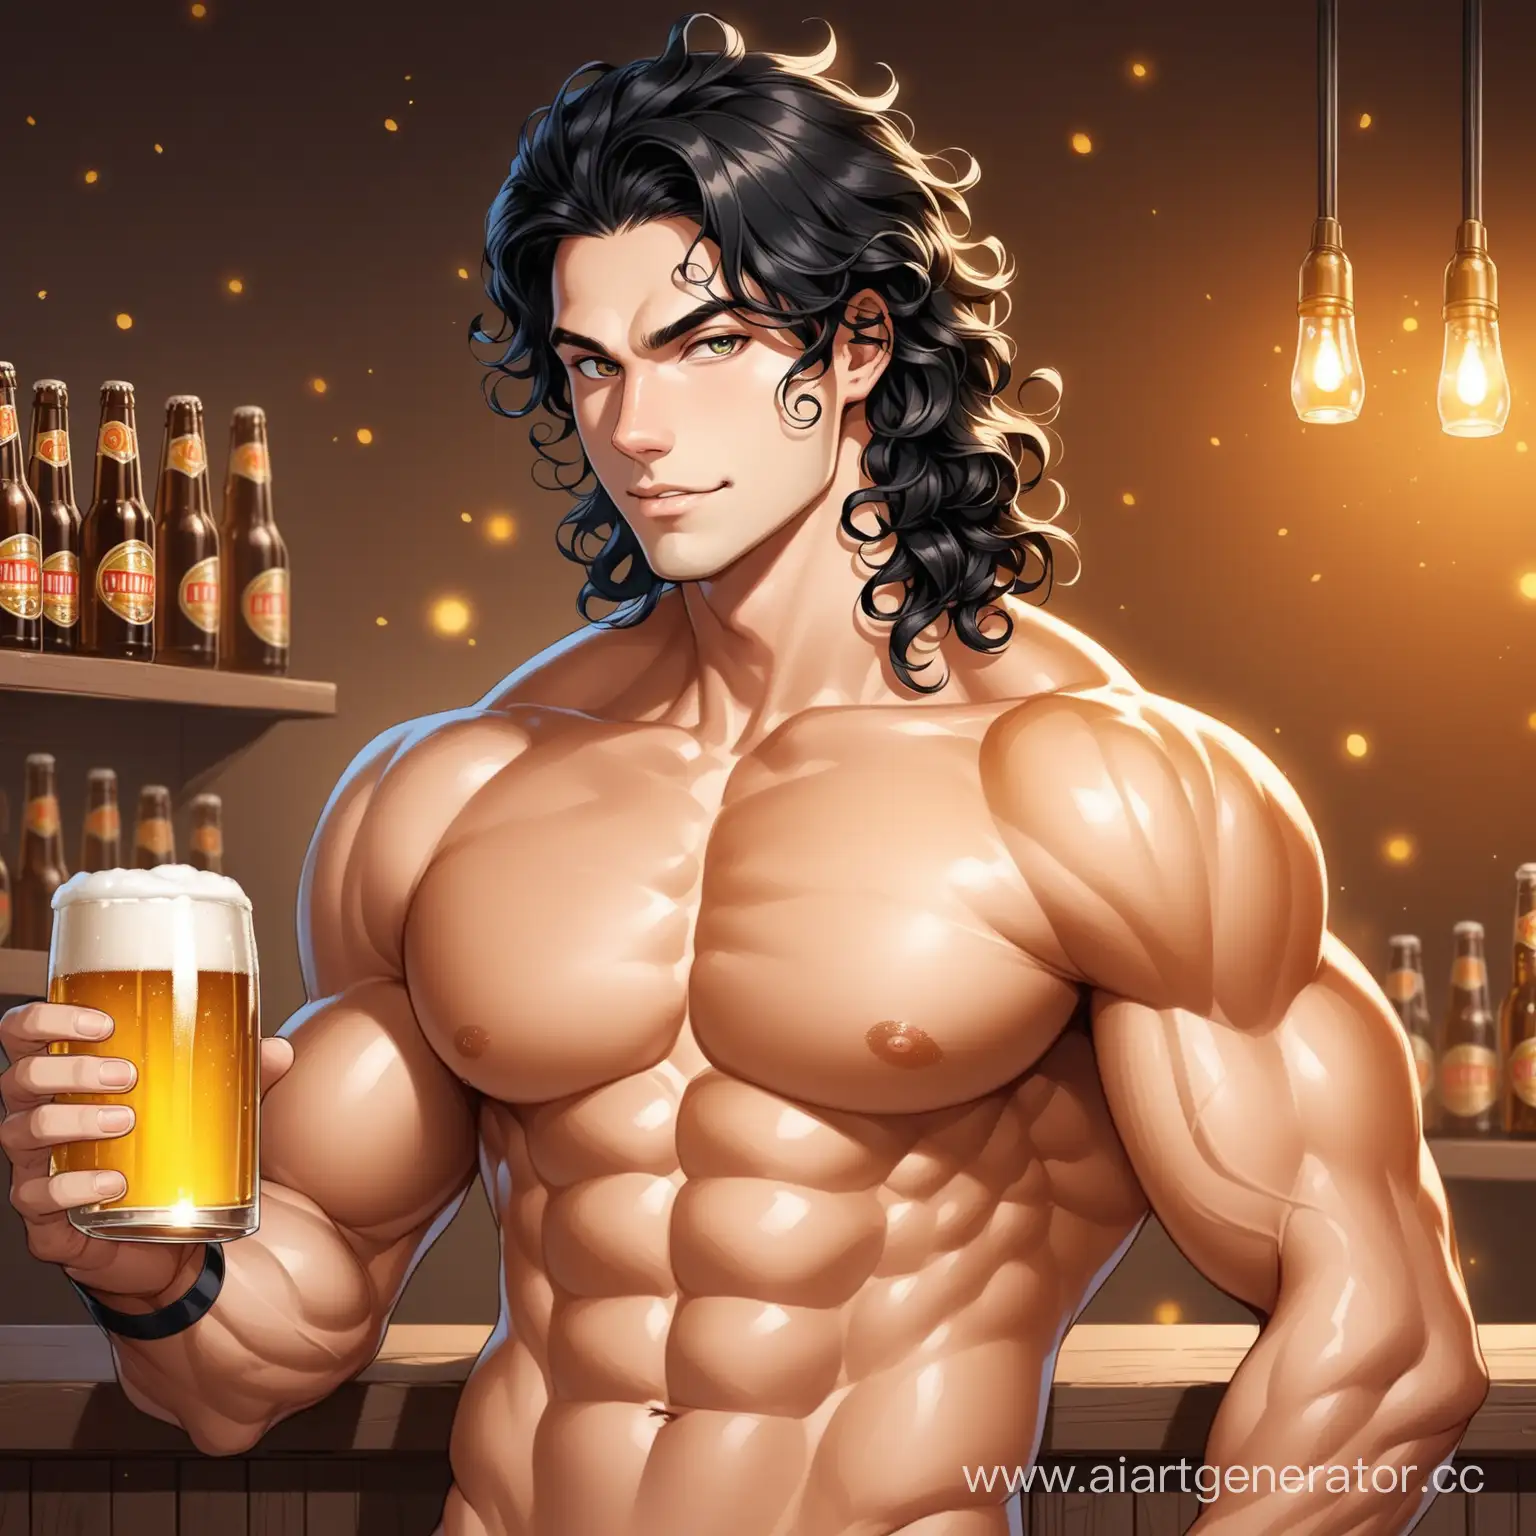 Transformation-Handsome-Young-Man-Maxim-Lumpov-Turns-into-CurlyHaired-Lizard-Drinking-Beer